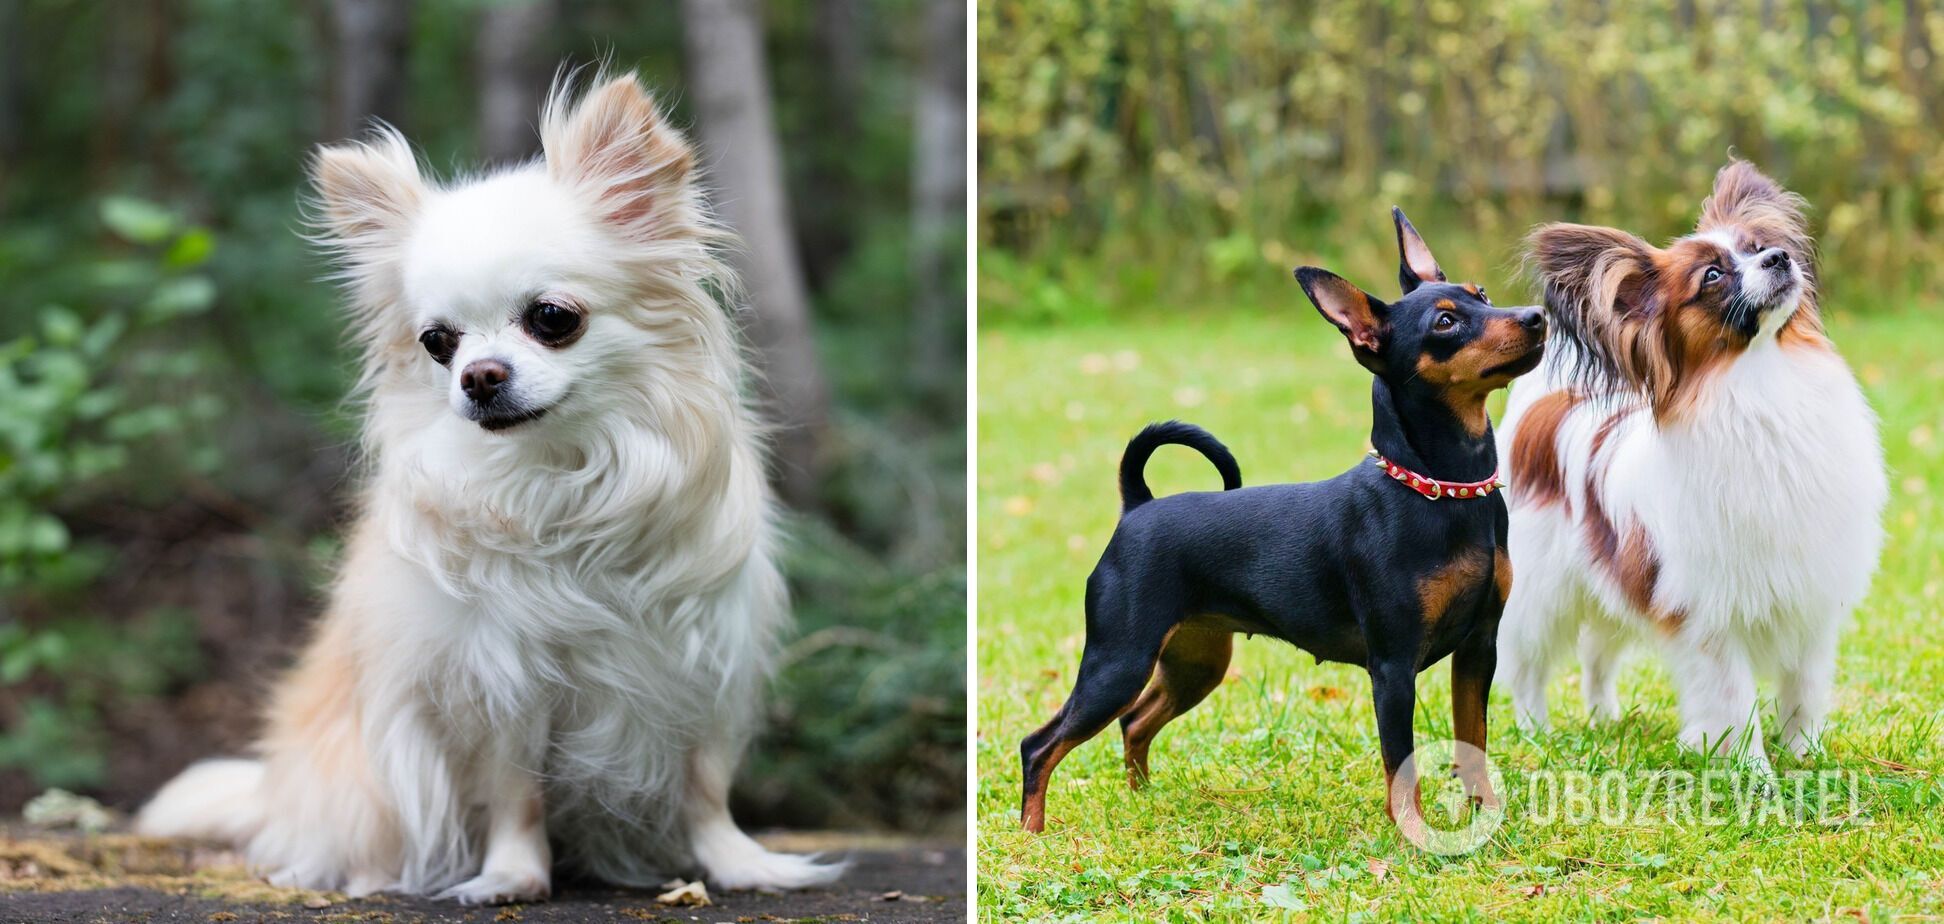 Cute at first sight only: which dog breeds families with children should not choose